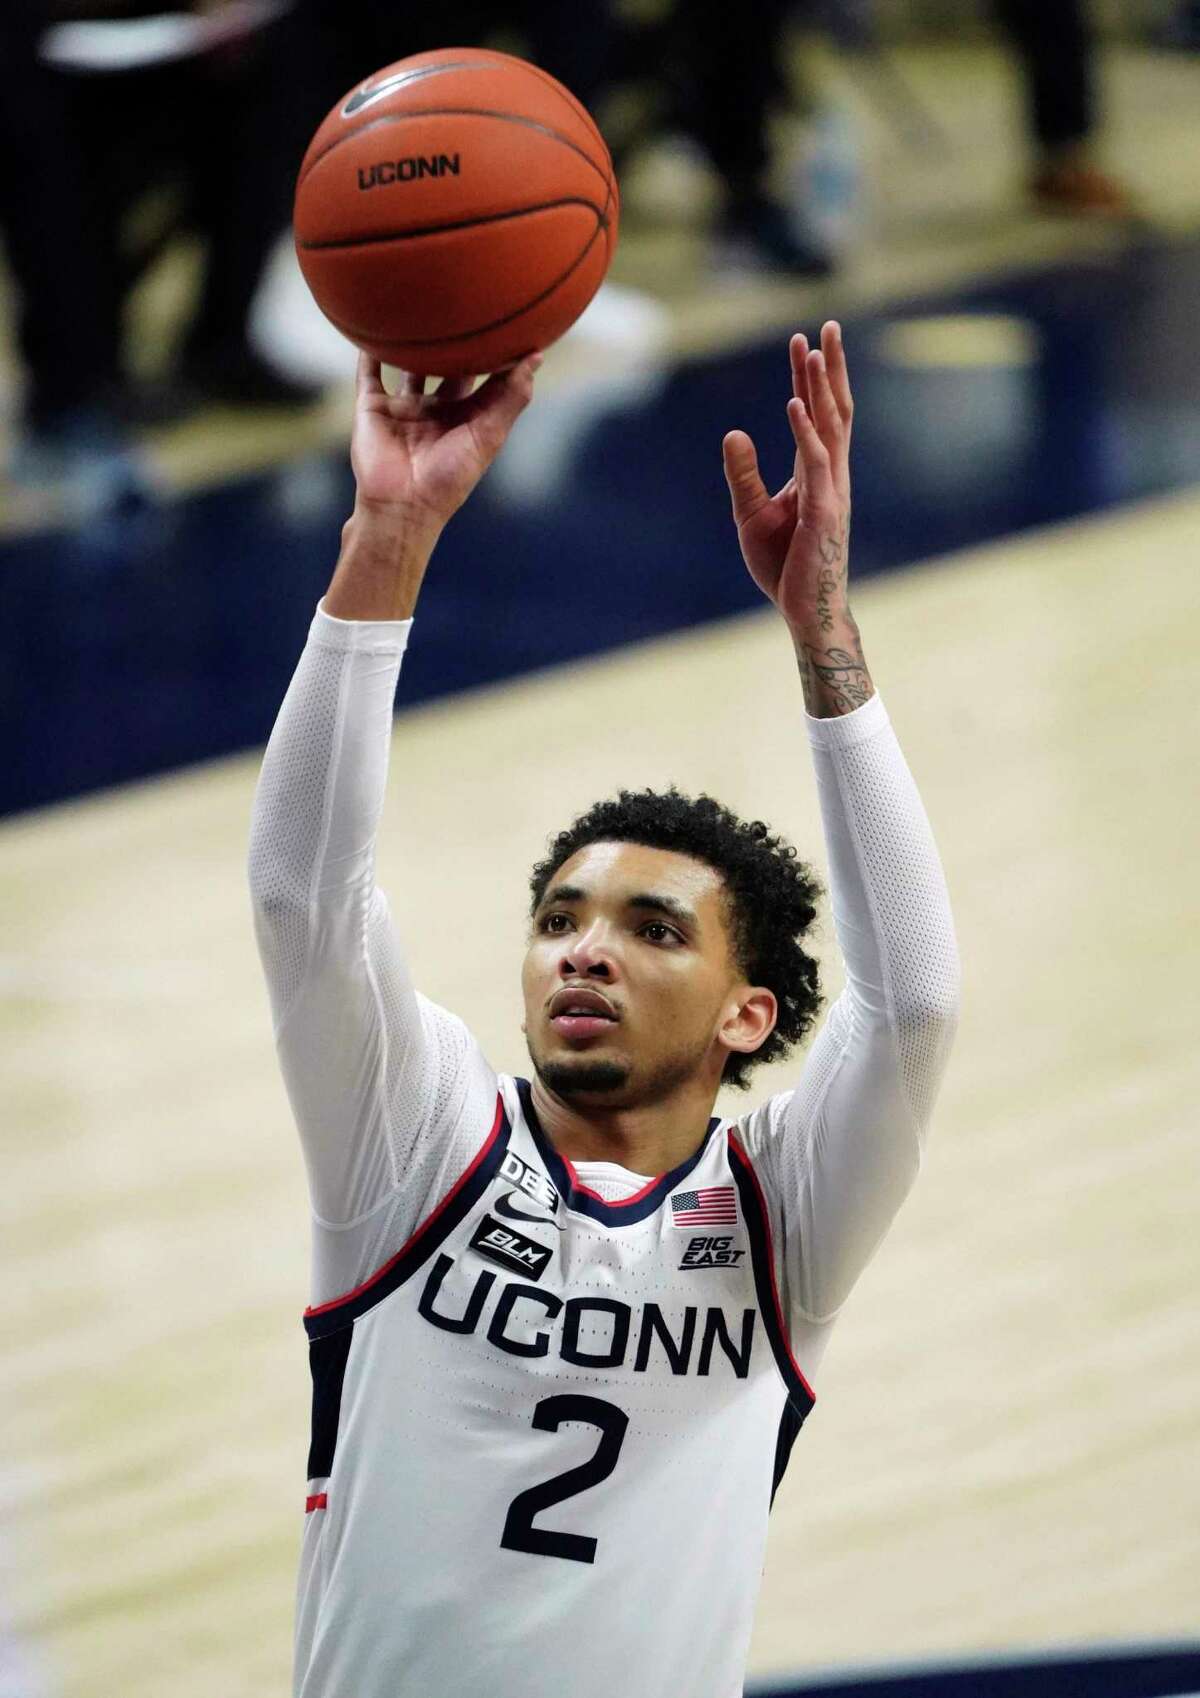 UConn guard James Bouknight shoots a free throw against Providence on Tuesday in Storrs.